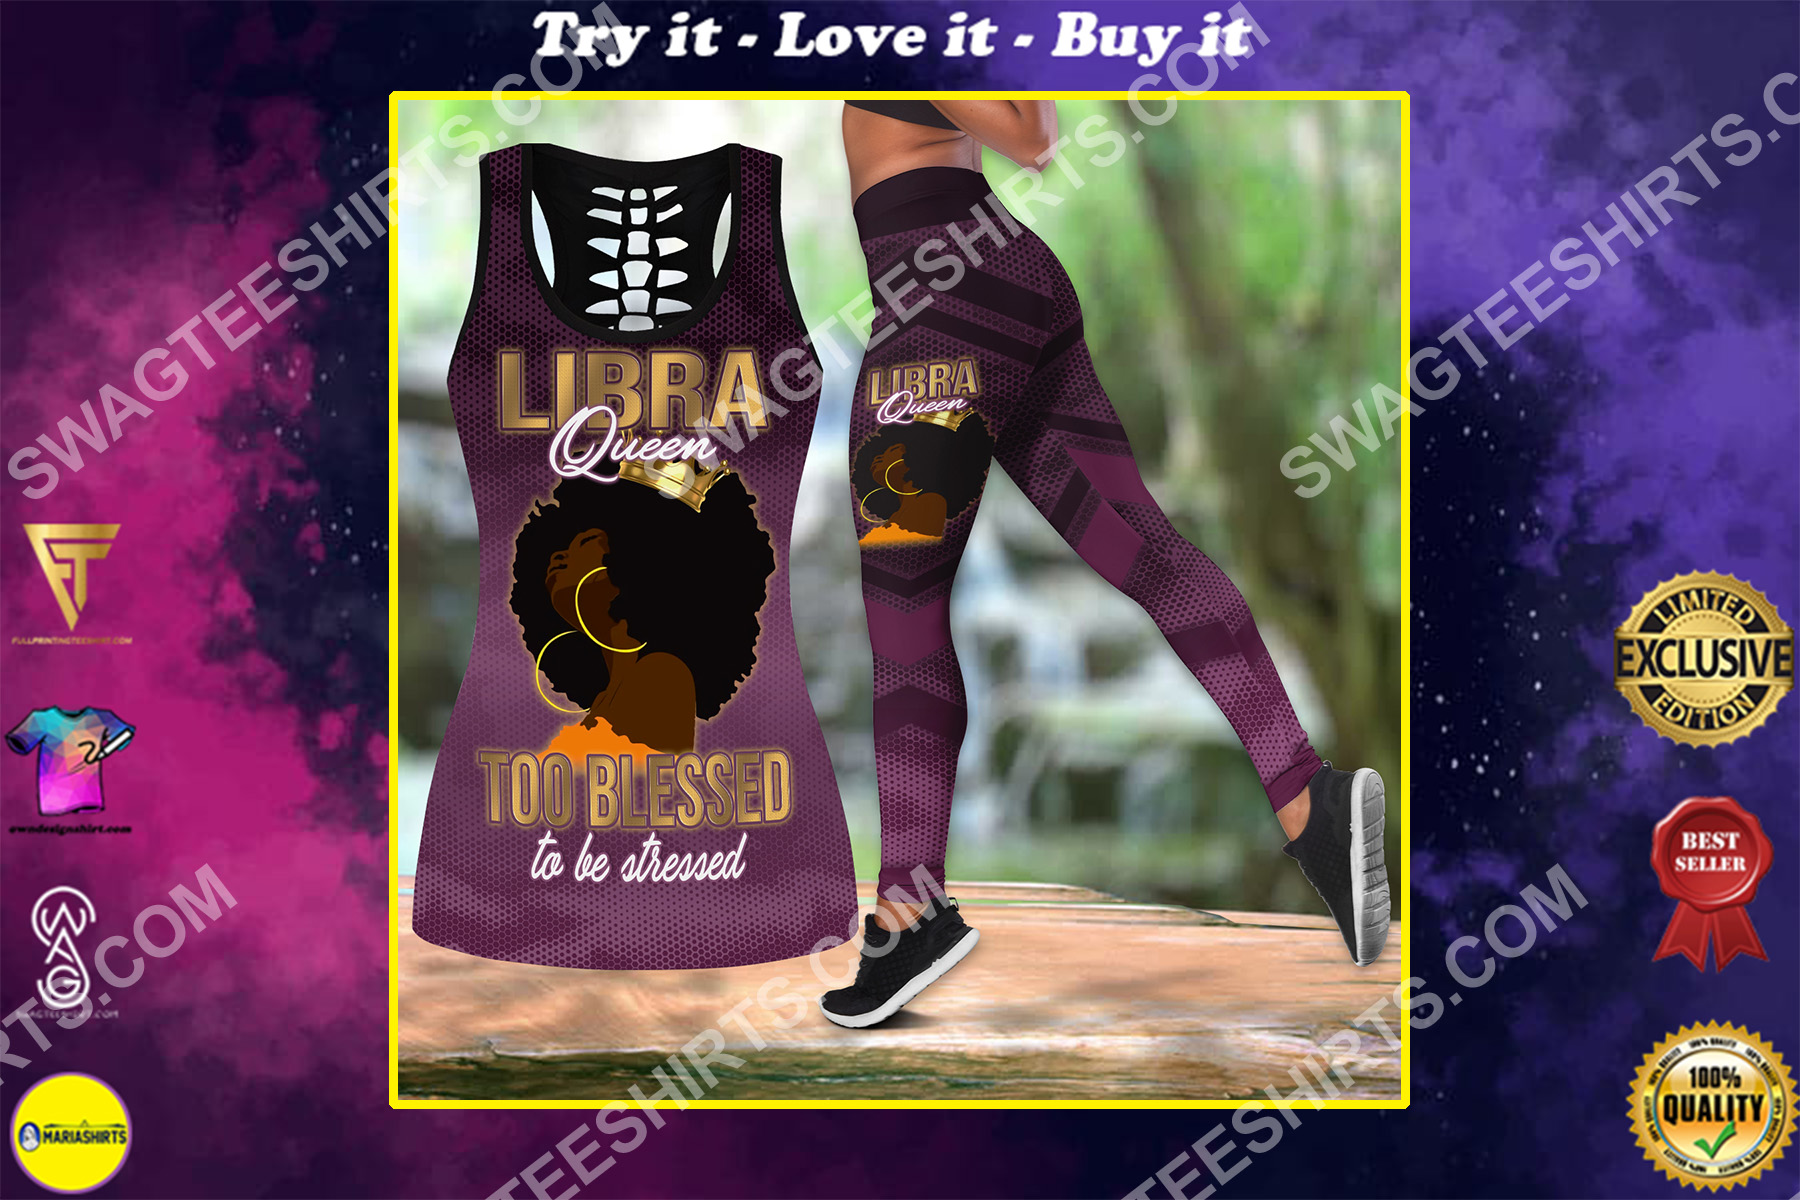 libra queen too blessed to be stressed birthday gift set sports outfit